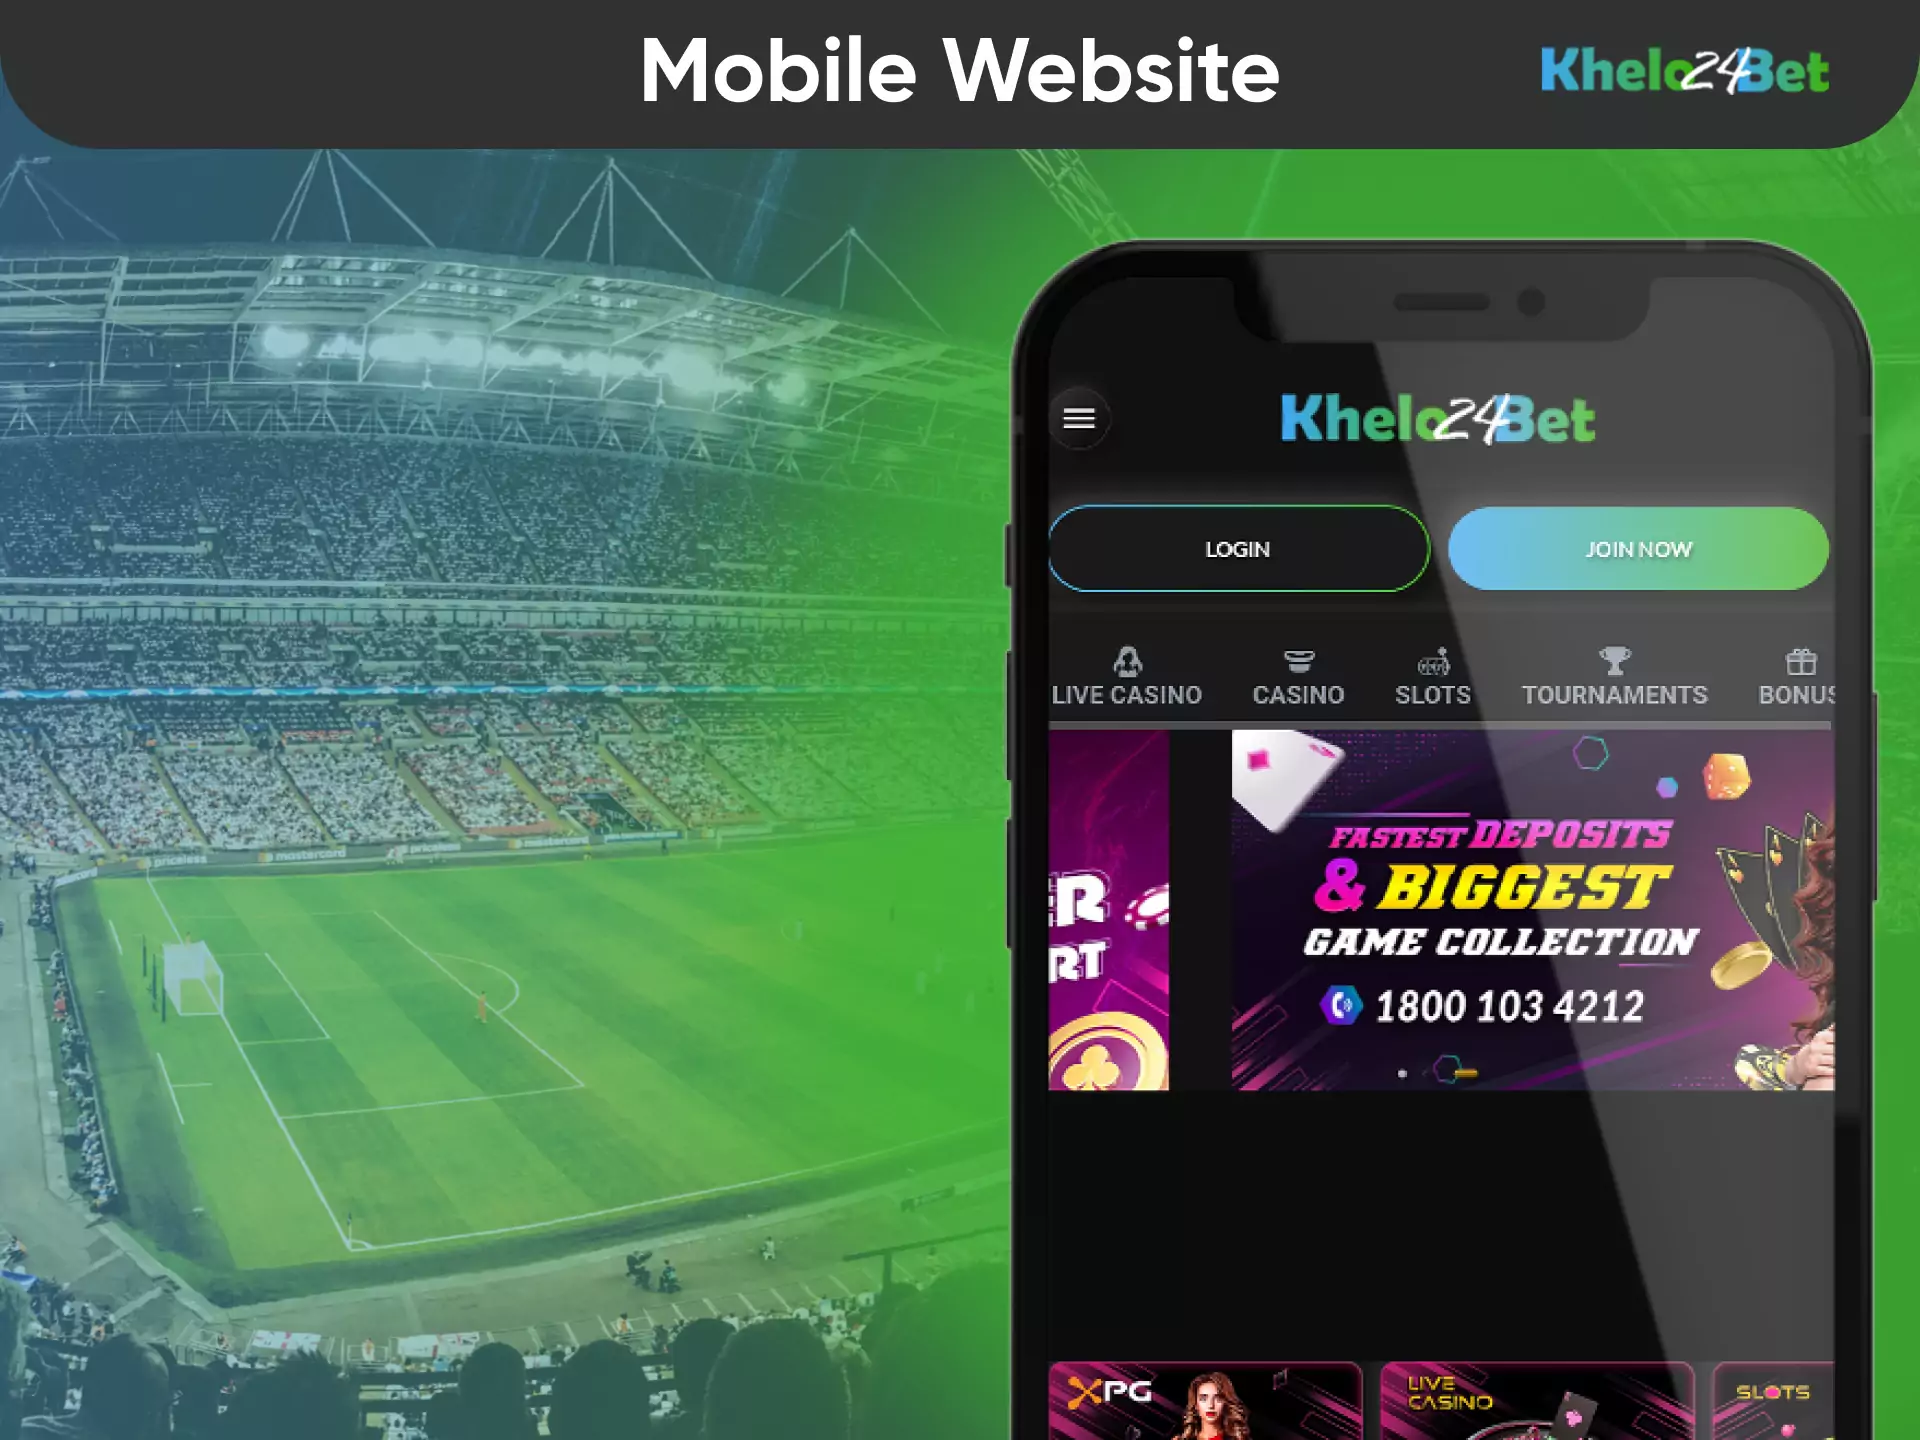 For mobile devices, there is a perfect version of the Khelo24bet website.